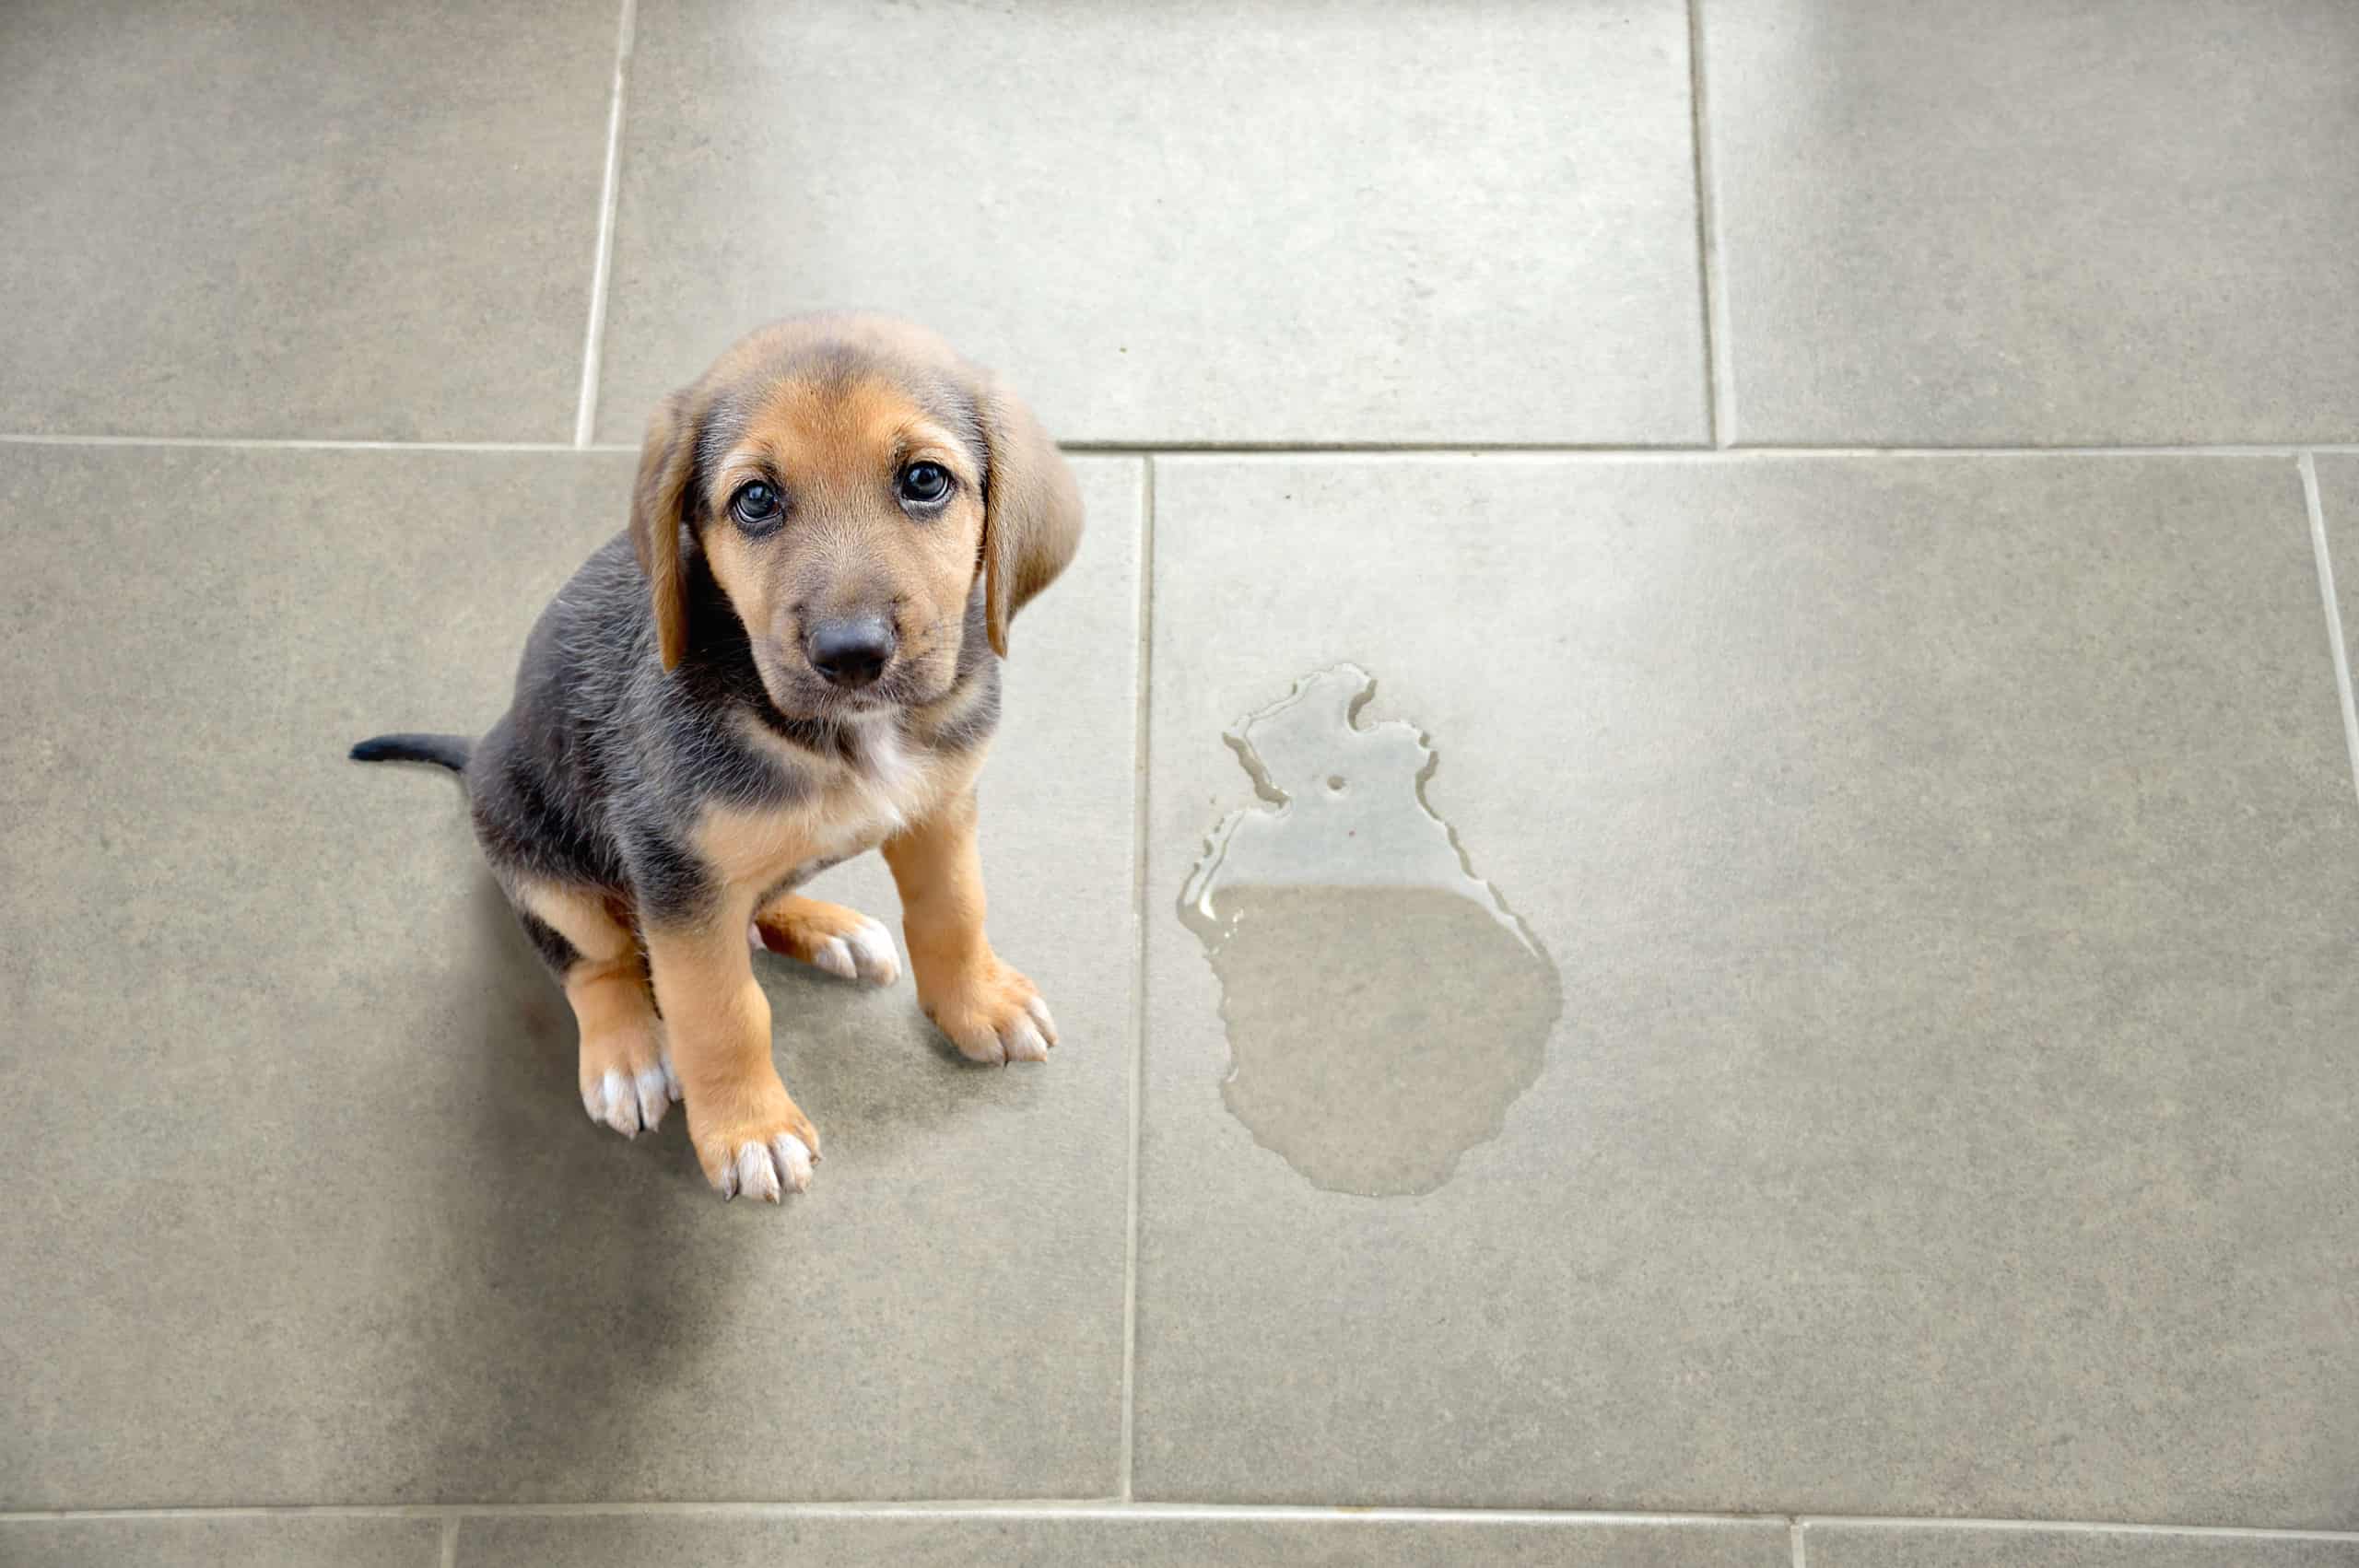 Why does my dog pee when he sees me?